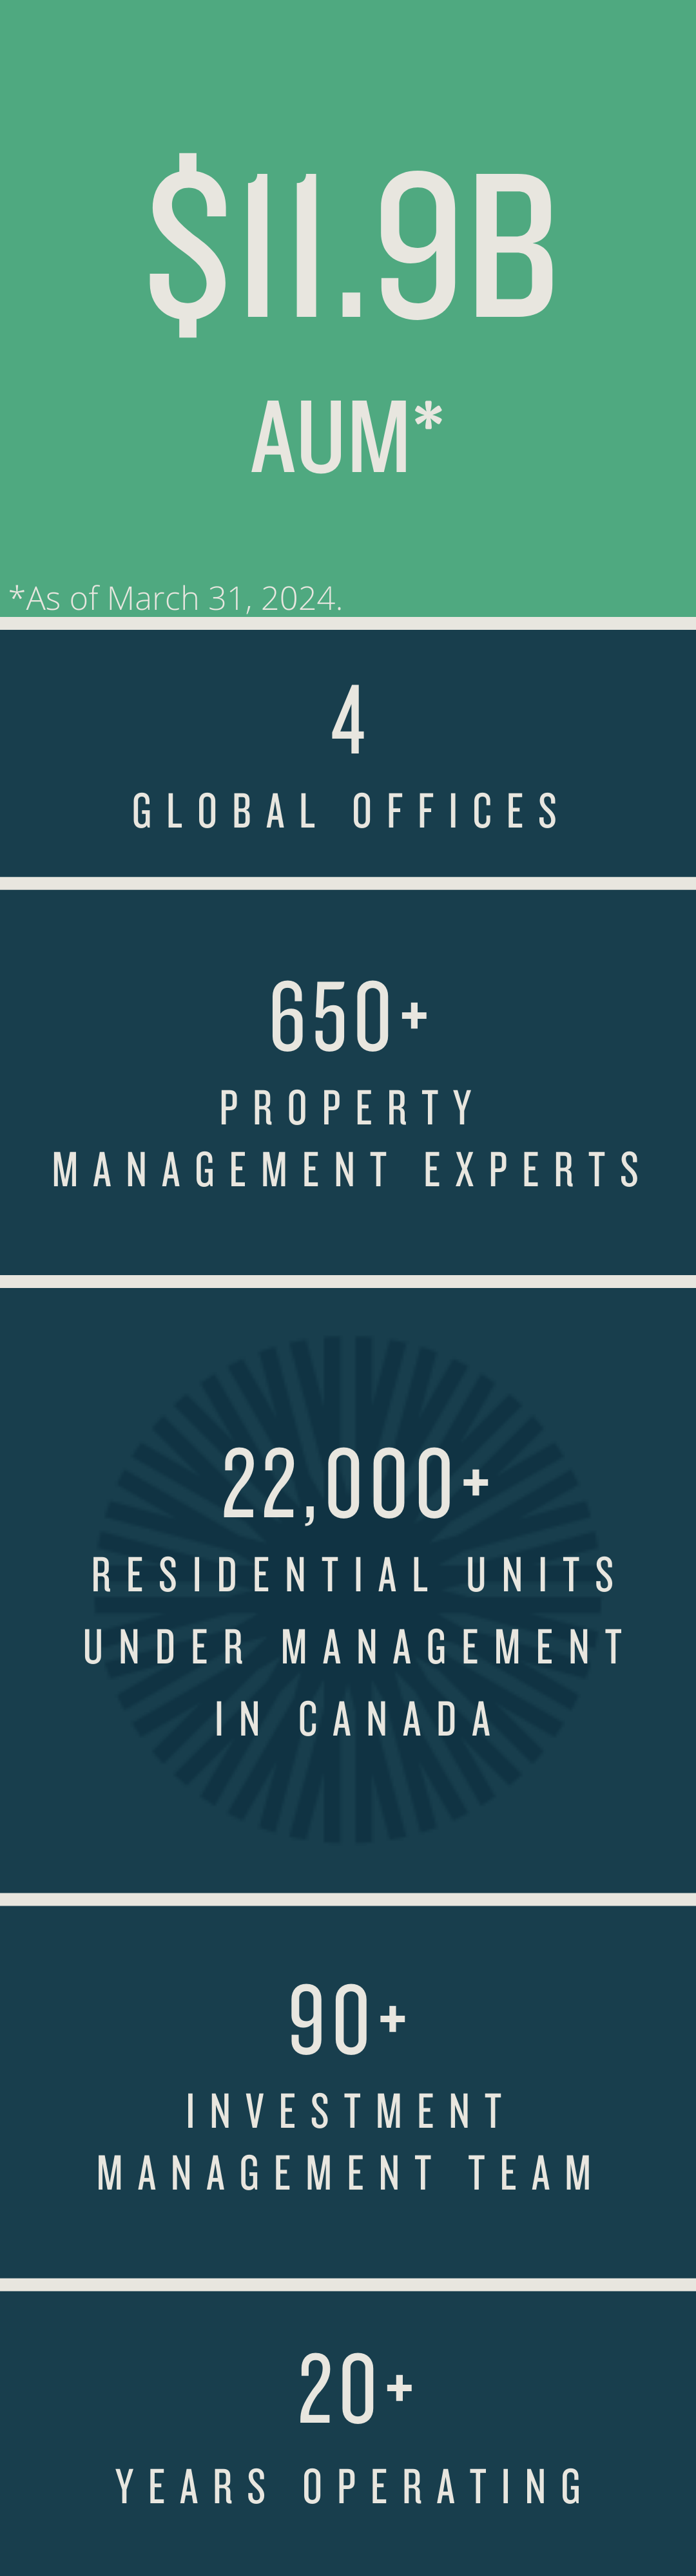 AUM 11.9Billion; 4 Global offices, 20+ year operating; Fully Integrated platform, 90+ investment management team; 650+ property management experts; 22,000+ residential units under management in Canada; as of March 31, 2024.